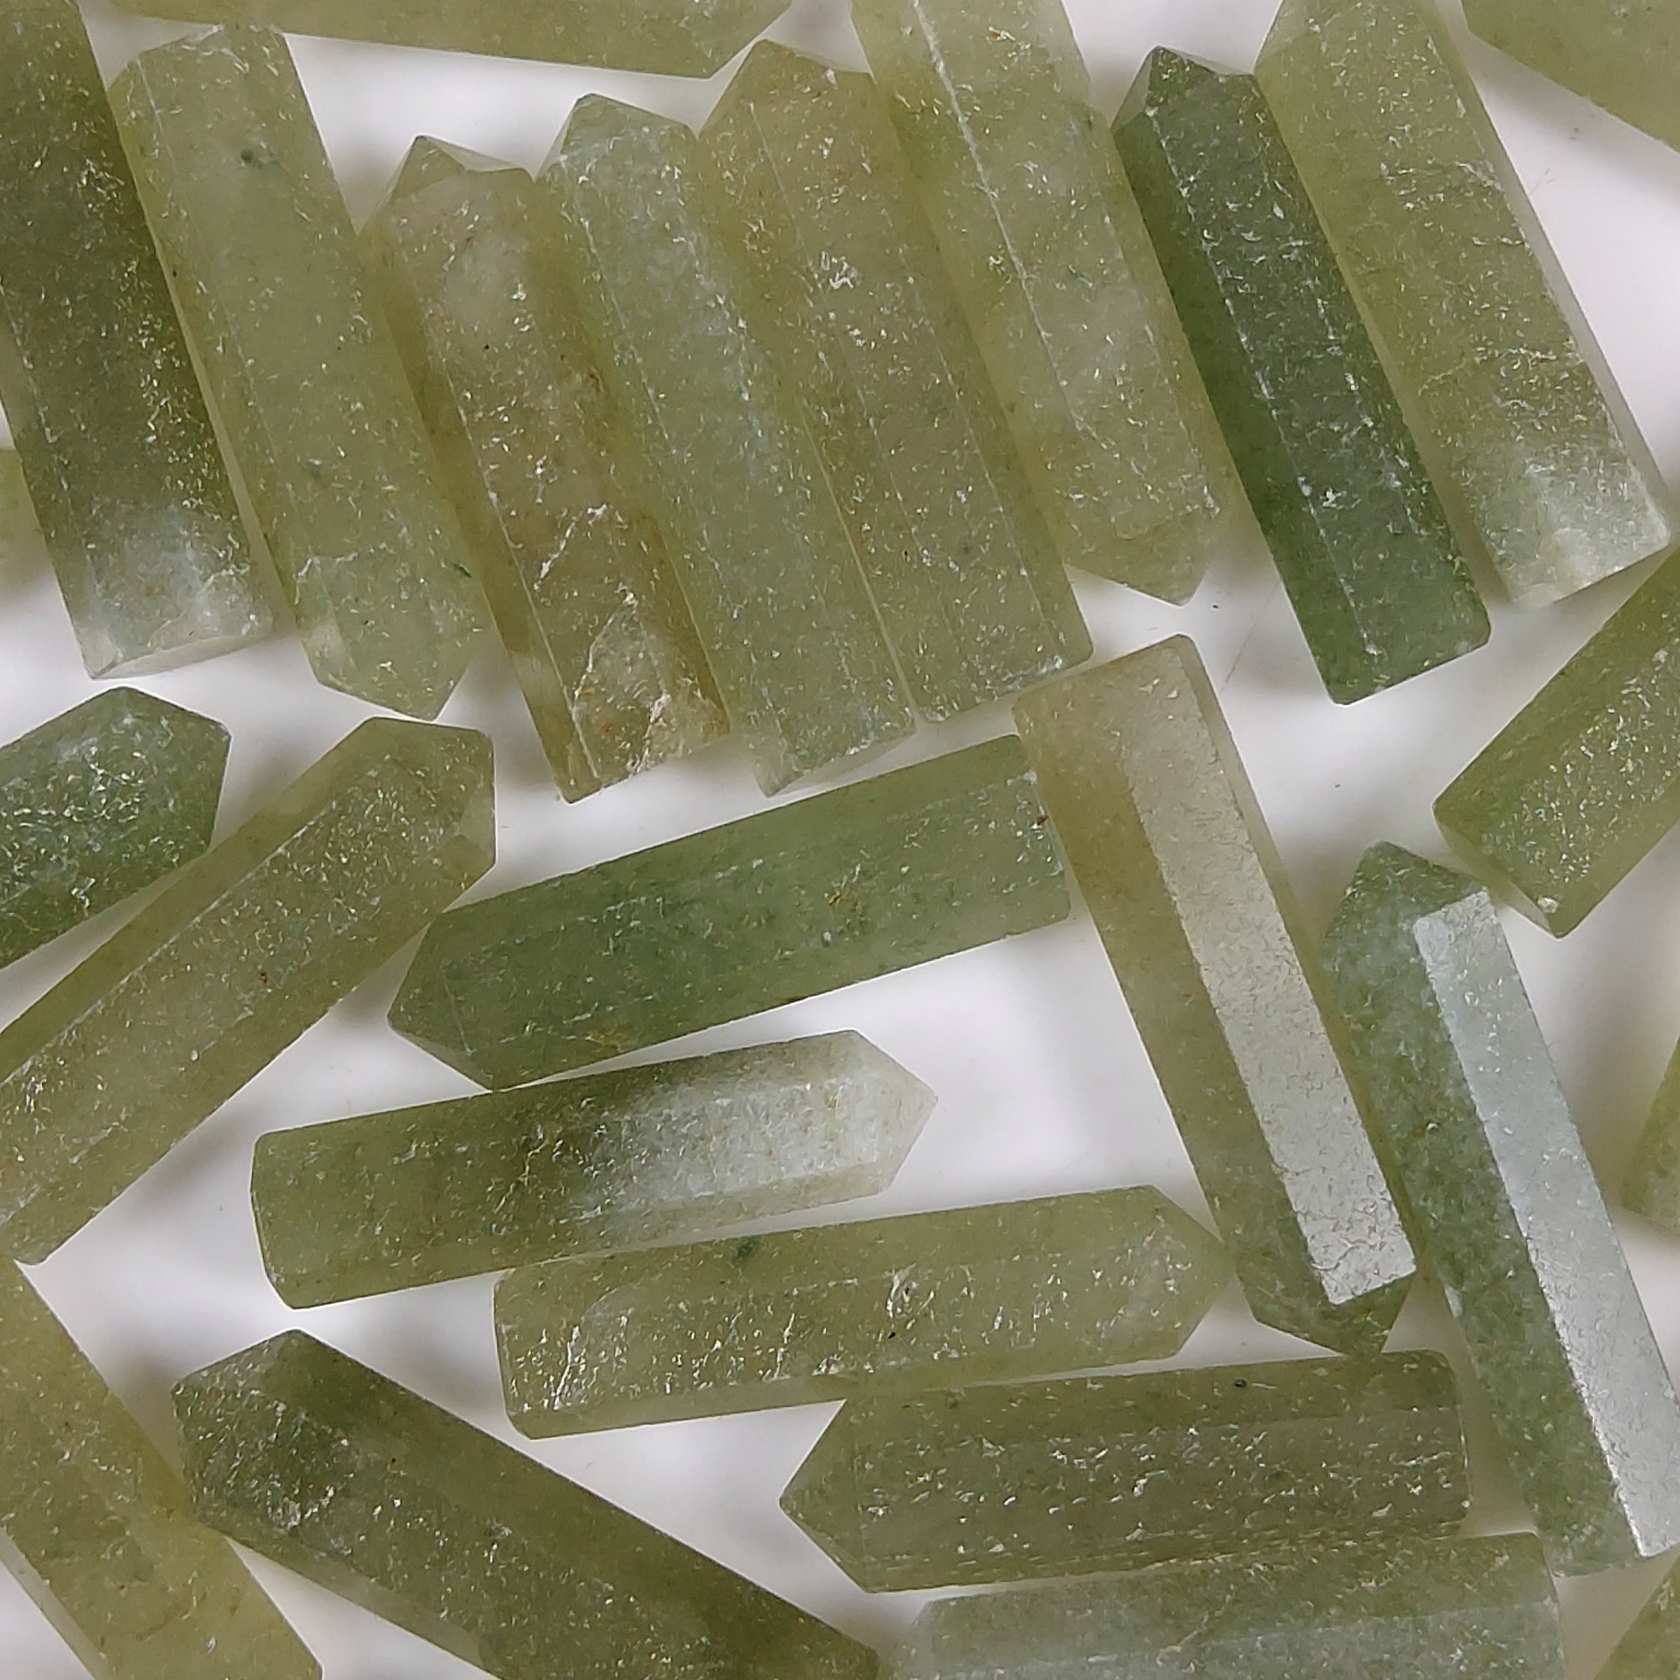 35Pcs 979Cts  Natural Green Aventurine Points Healing Crystals Pencil Gemstone Towers Aventurine Crystal Points Cabochon Gemstone Lot 35x7 30x5mm#G-453